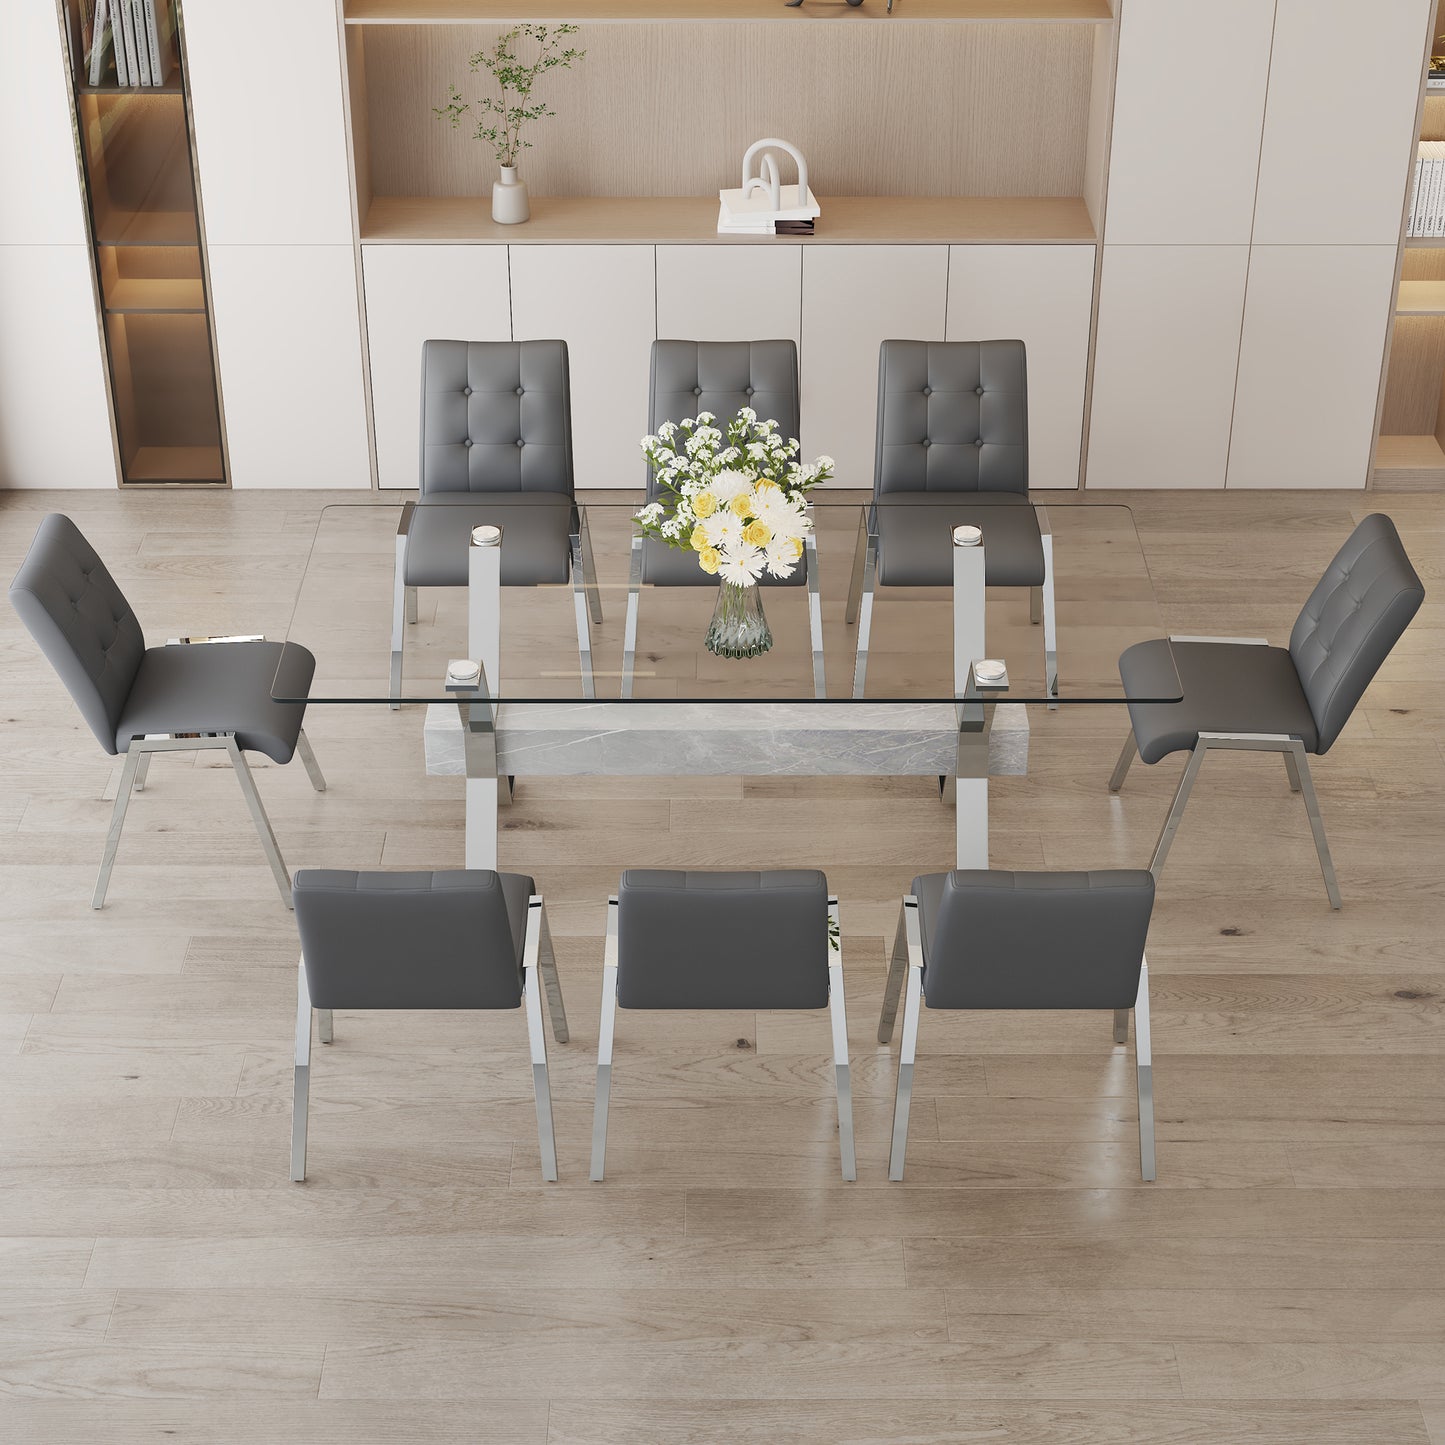 Nicolette 8-Piece Dining Table (gray chairs)